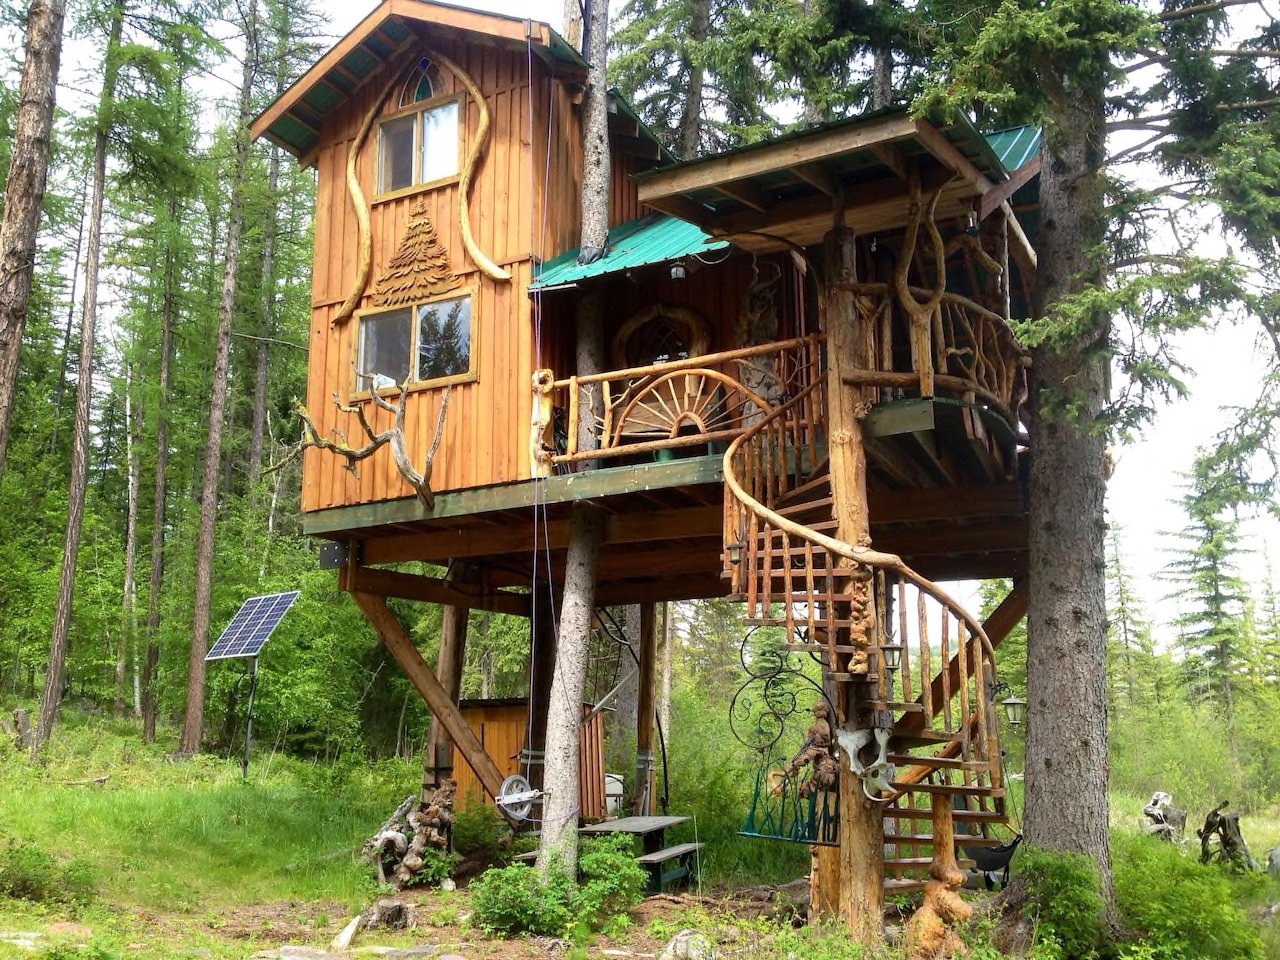 Treehouse with a Rocky Mountain view, Wardner, B.C.